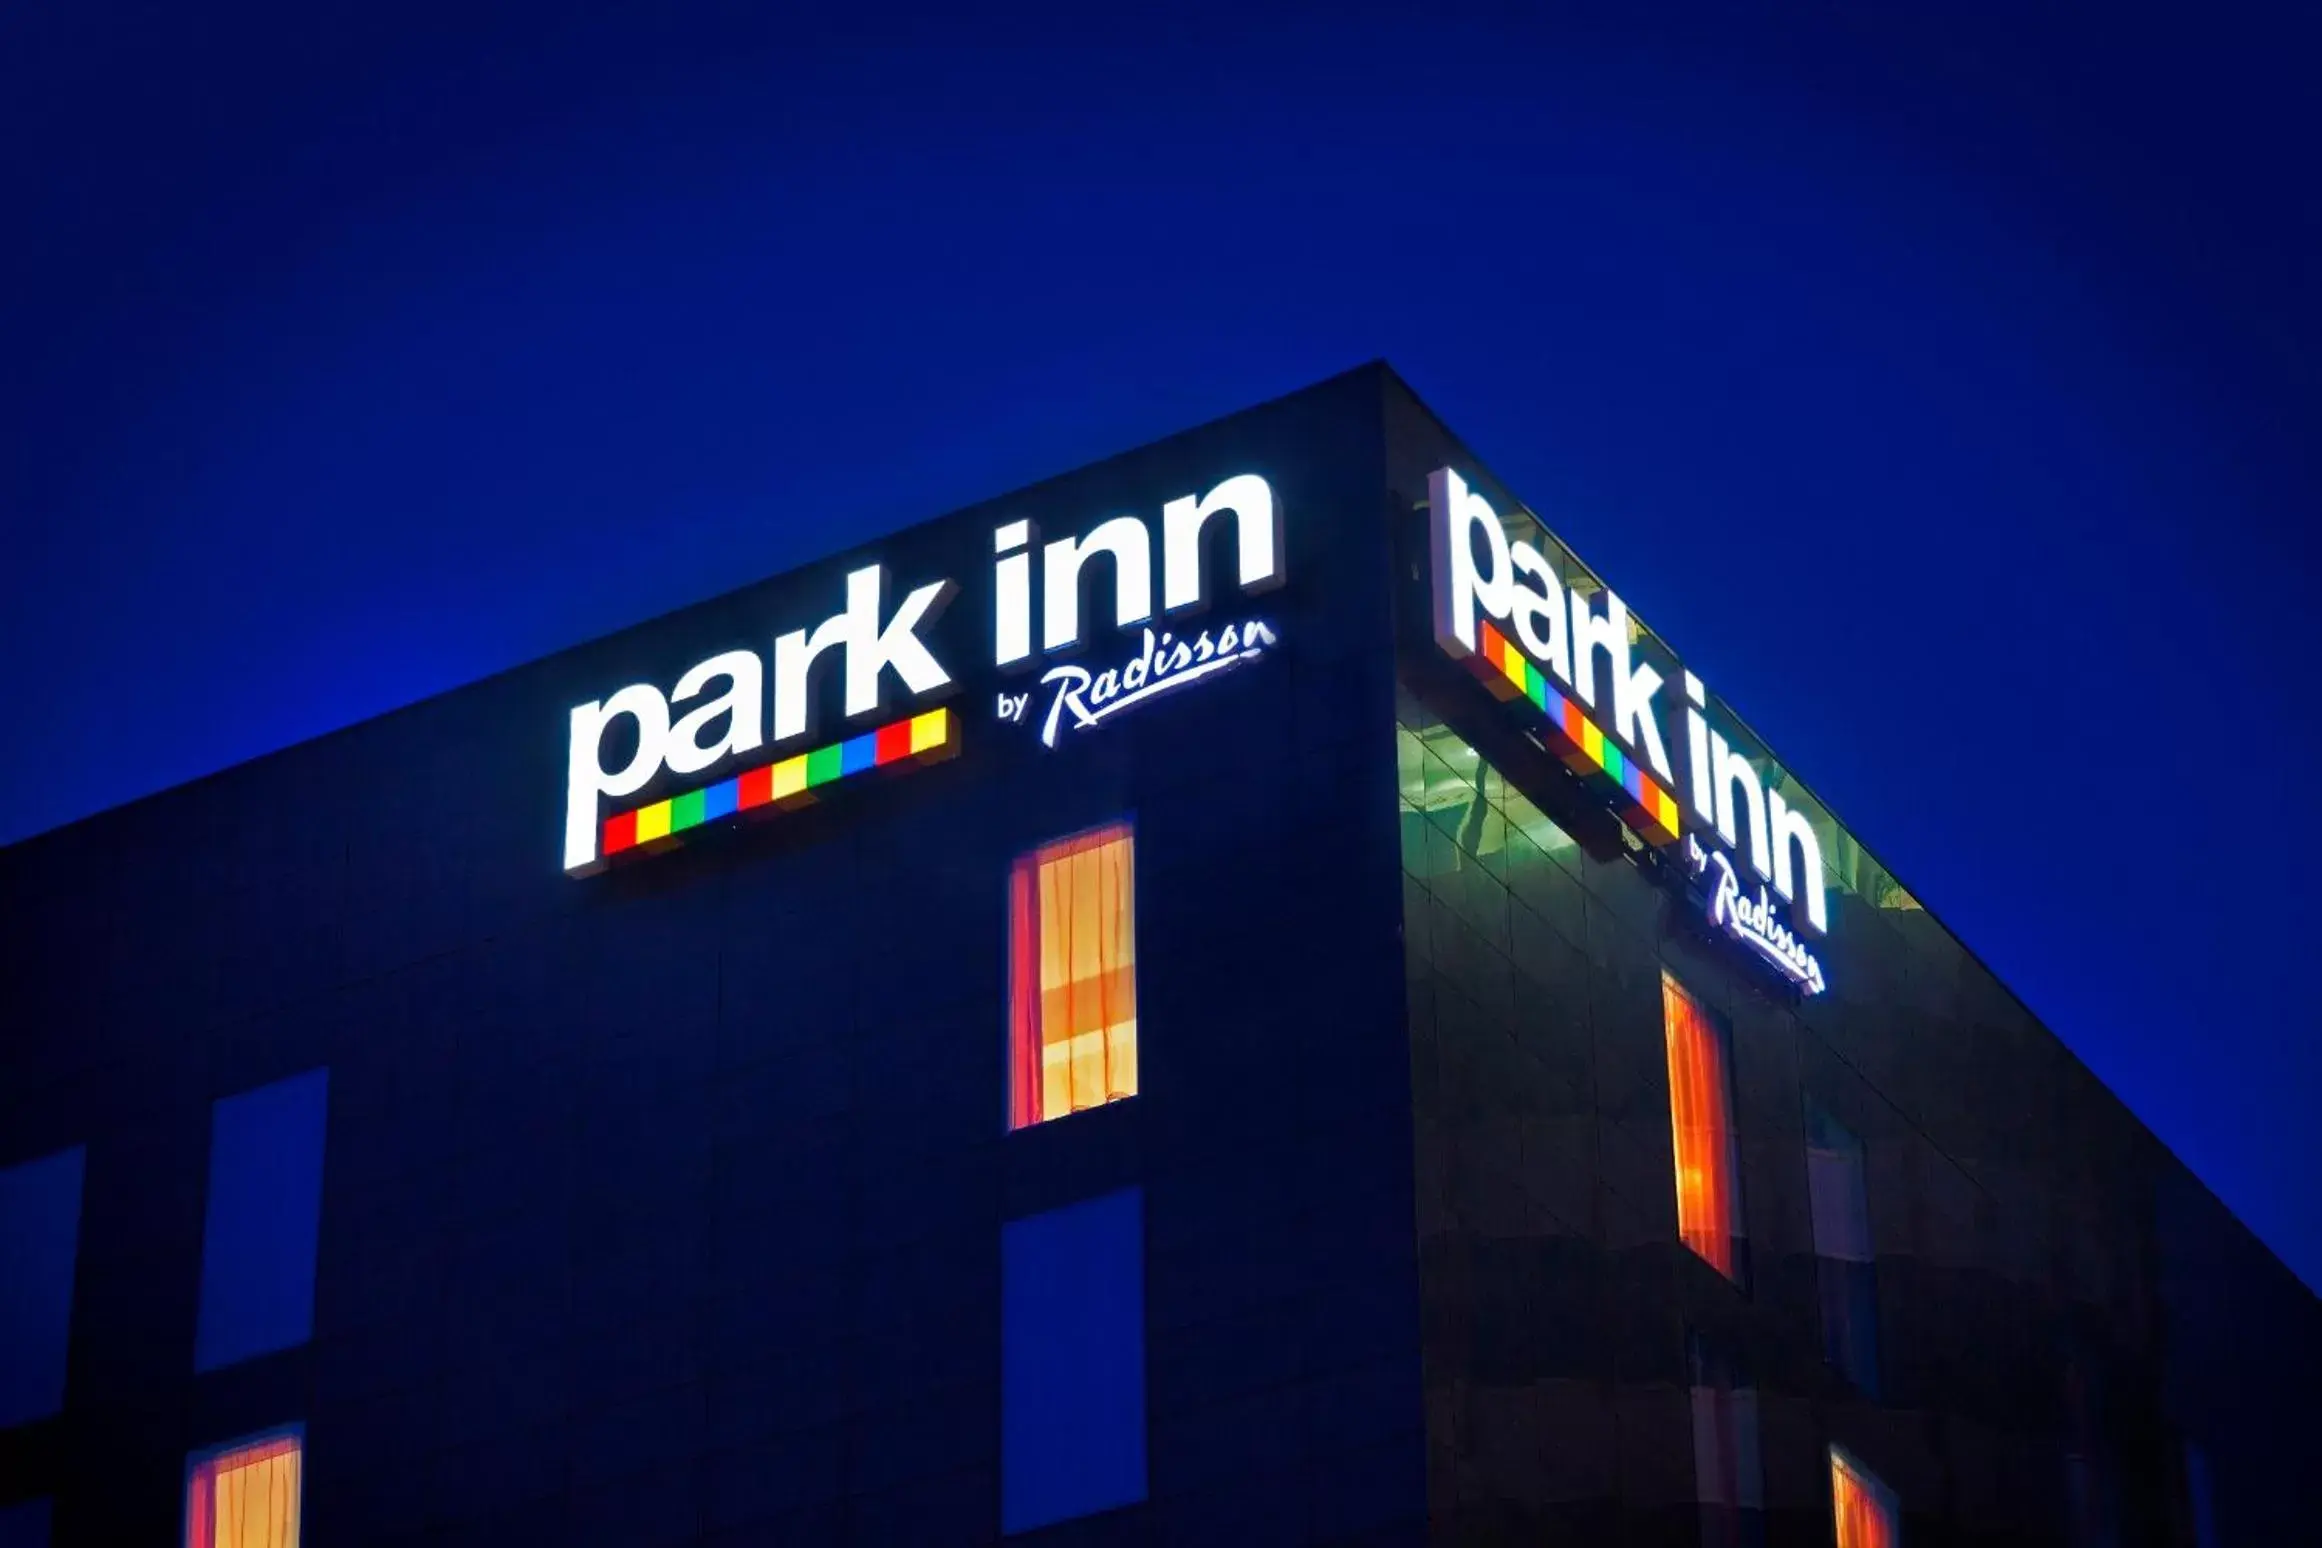 Property Building in Park Inn by Radisson Manchester City Centre